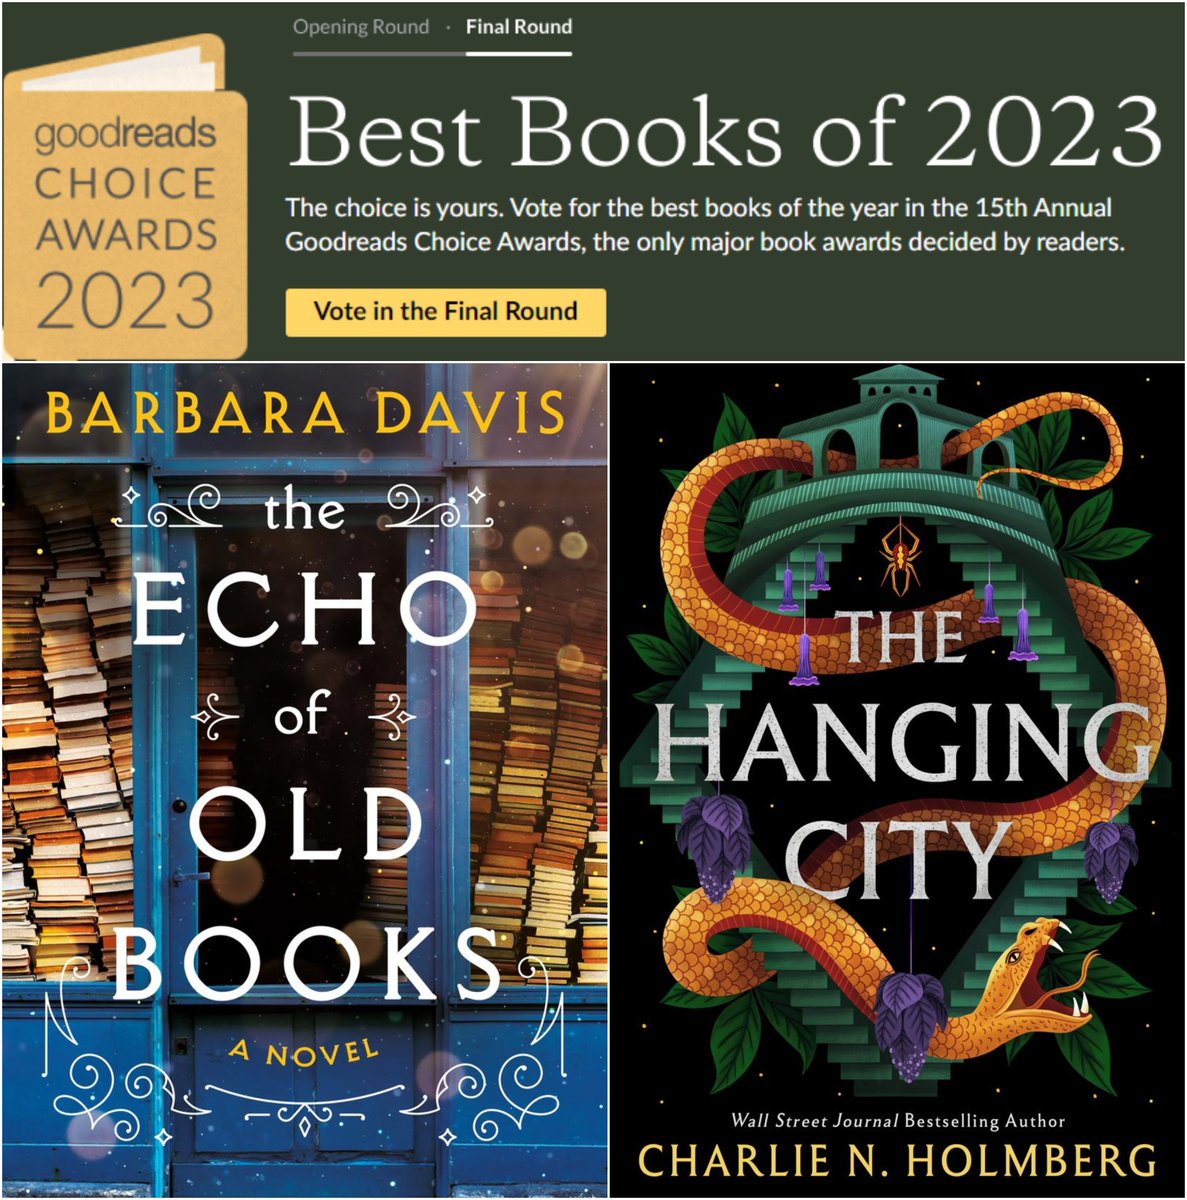 We’re excited to announce that @bdavisauthor’s THE ECHO OF OLD BOOKS and @CNHolmberg’s THE HANGING CITY have made it to the final round of the #GoodreadsChoice Awards 2023! There’s only five days left, so make sure to send in your votes. @AmazonPub